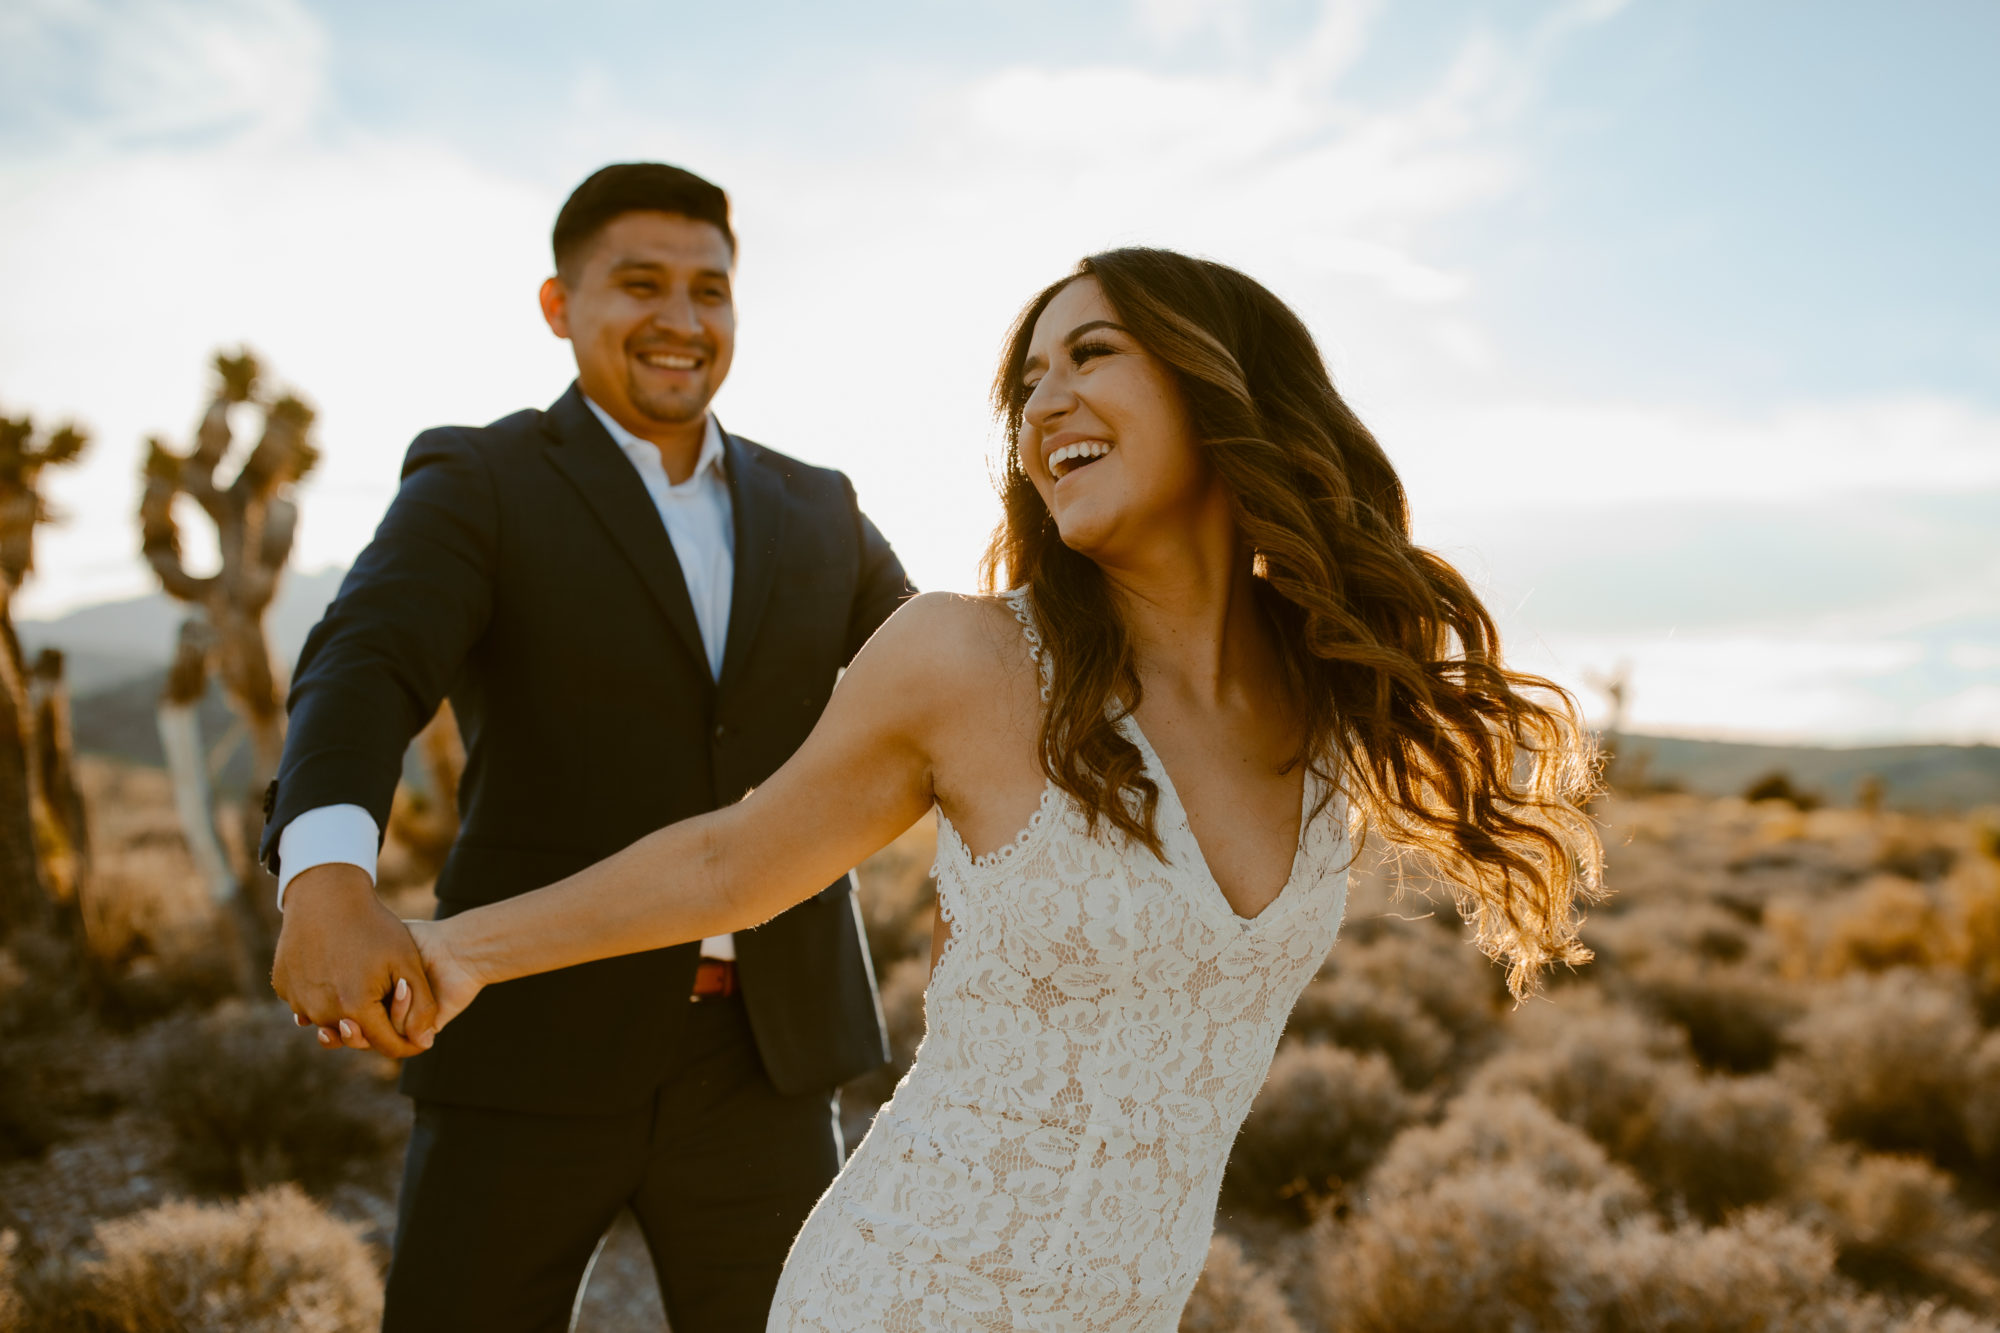 Couple posing during day after couples wedding photos in the desert